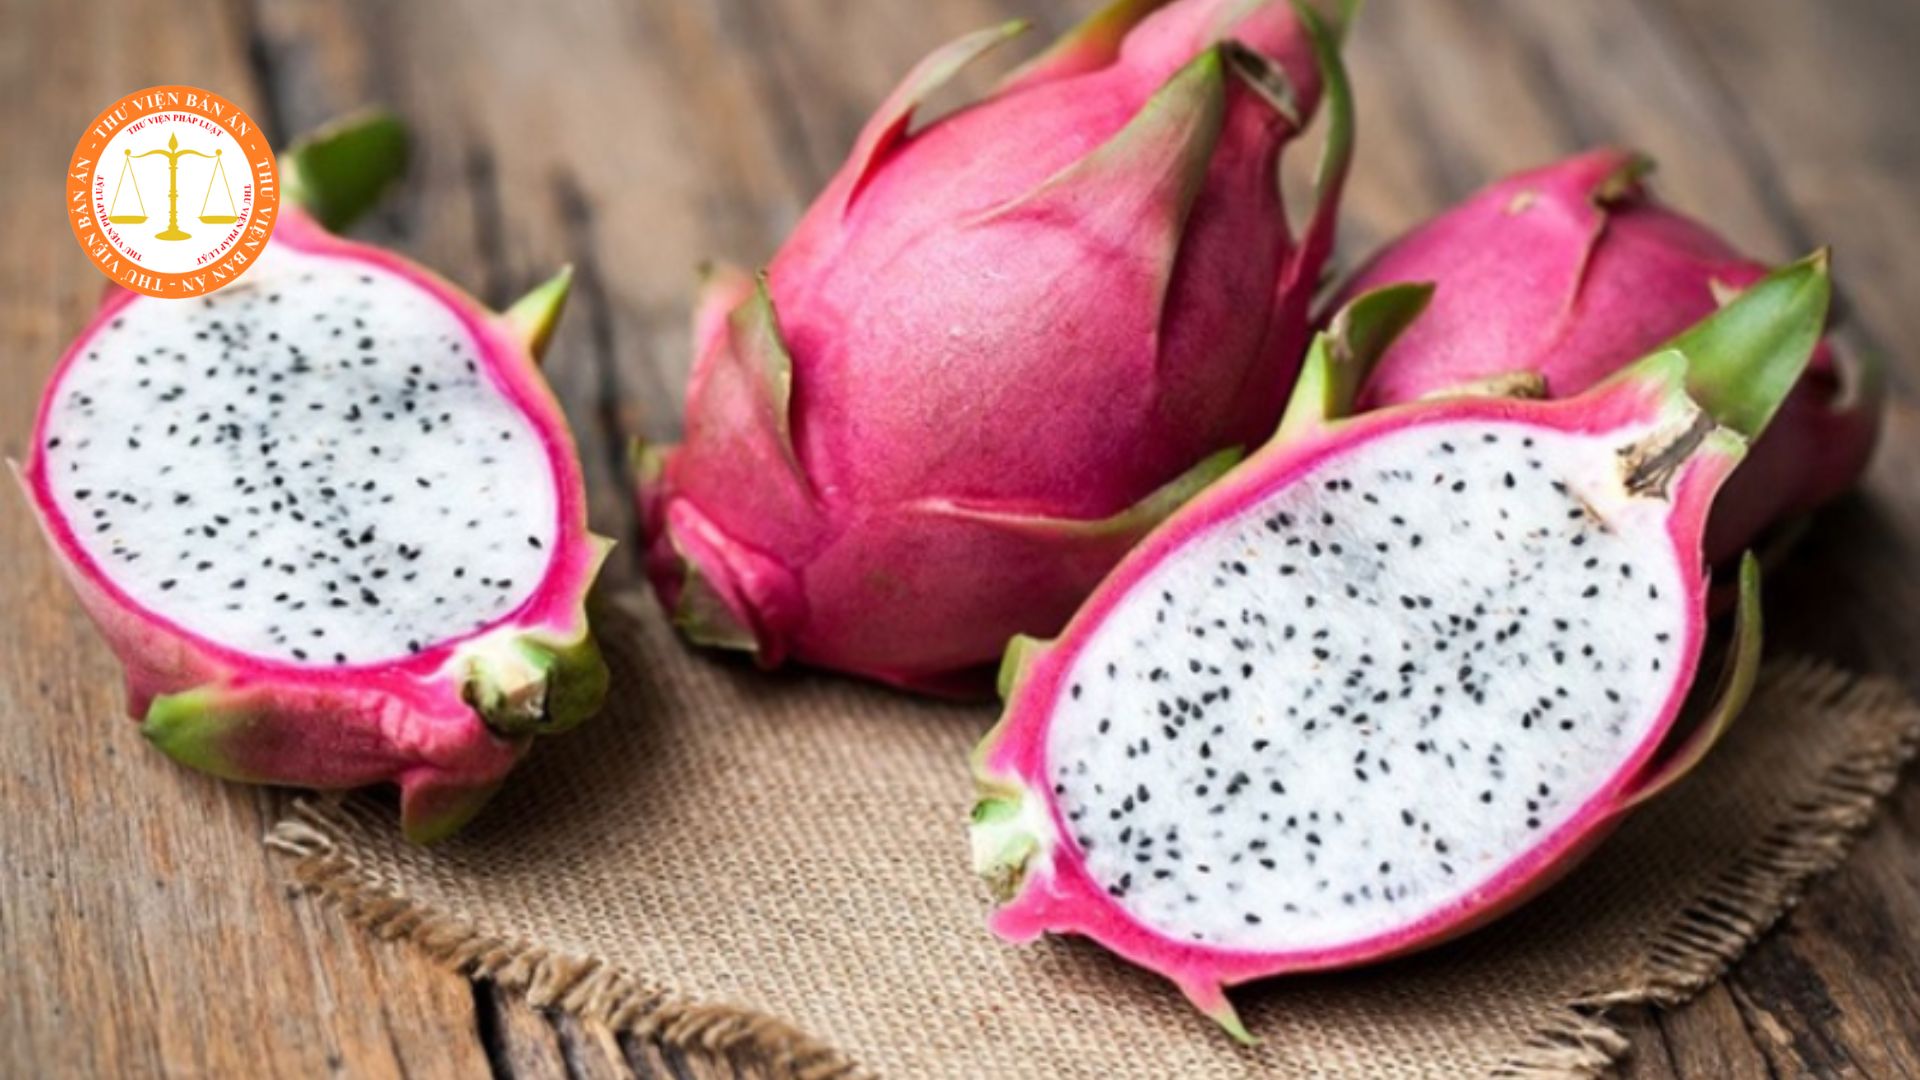 Quality requirements for fresh dragon fruit in Vietnam under TCVN 7523:2014